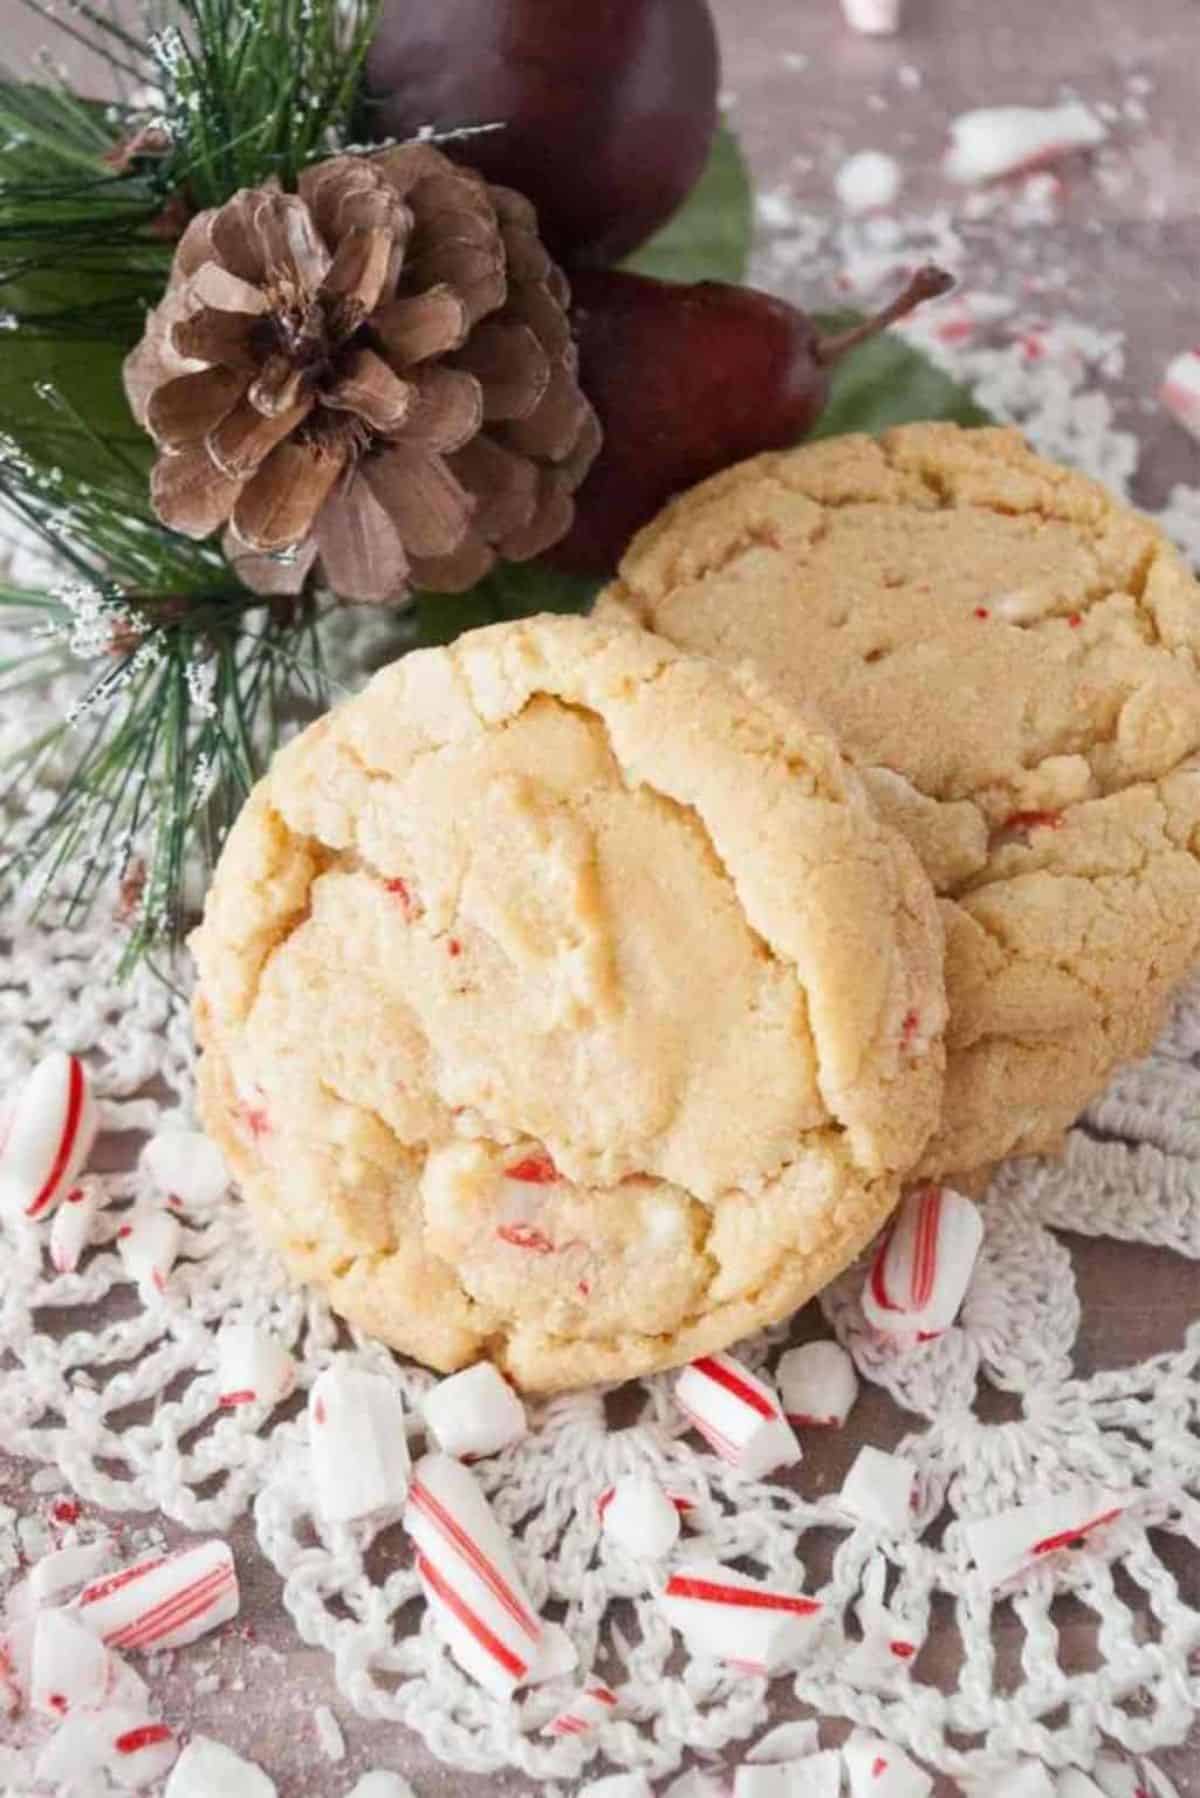 Two delicious Candy Cane Cookies AKA Peppermint Chocolate Chips.